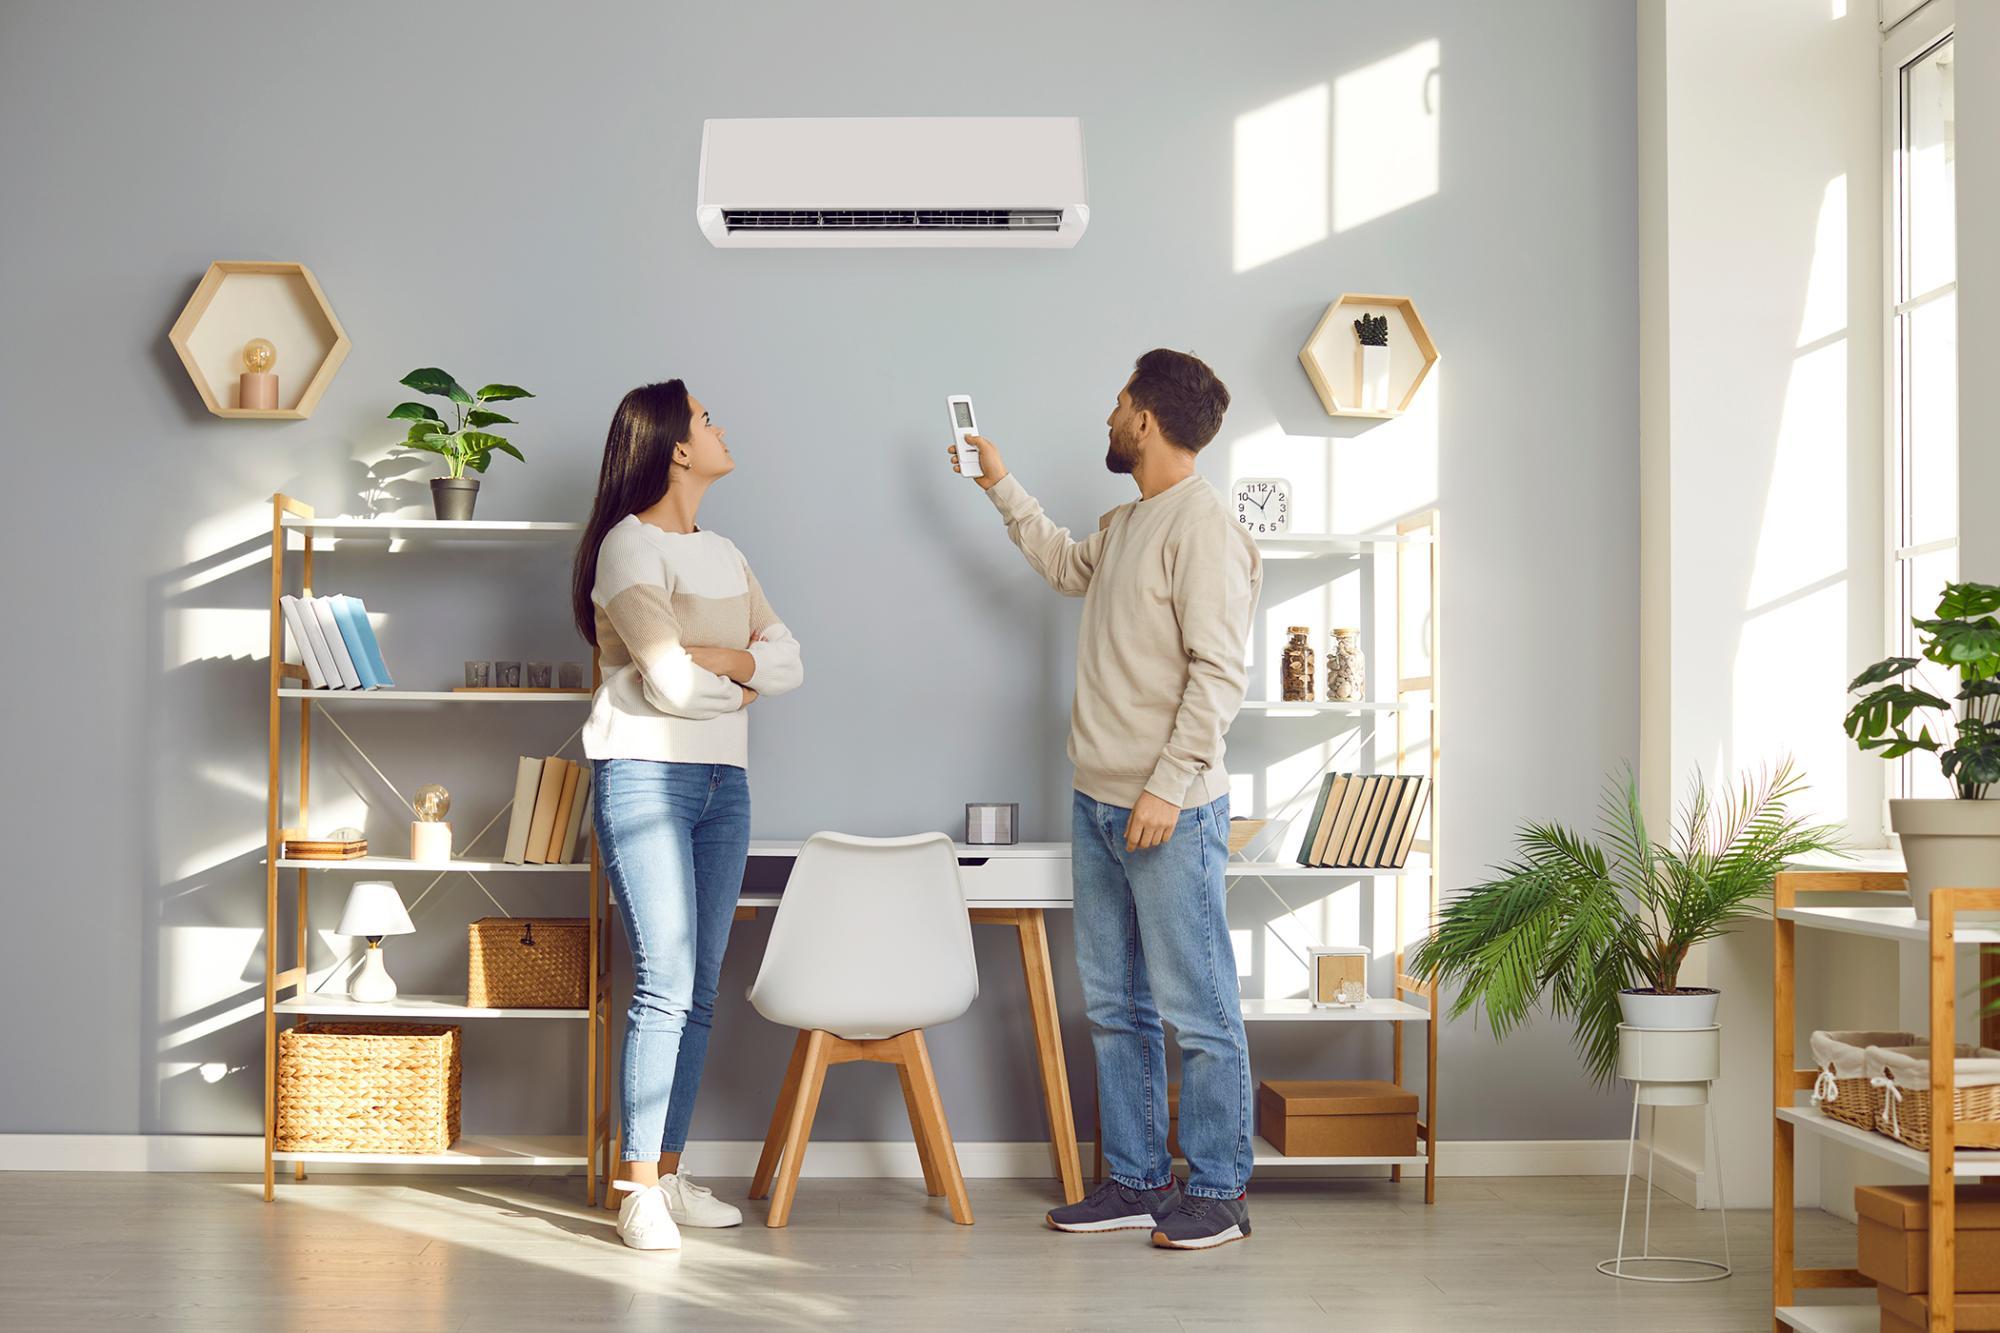 Male and female inside a home office looking at the indoor unit of a ductless heat pump holding a remote to change the temperature